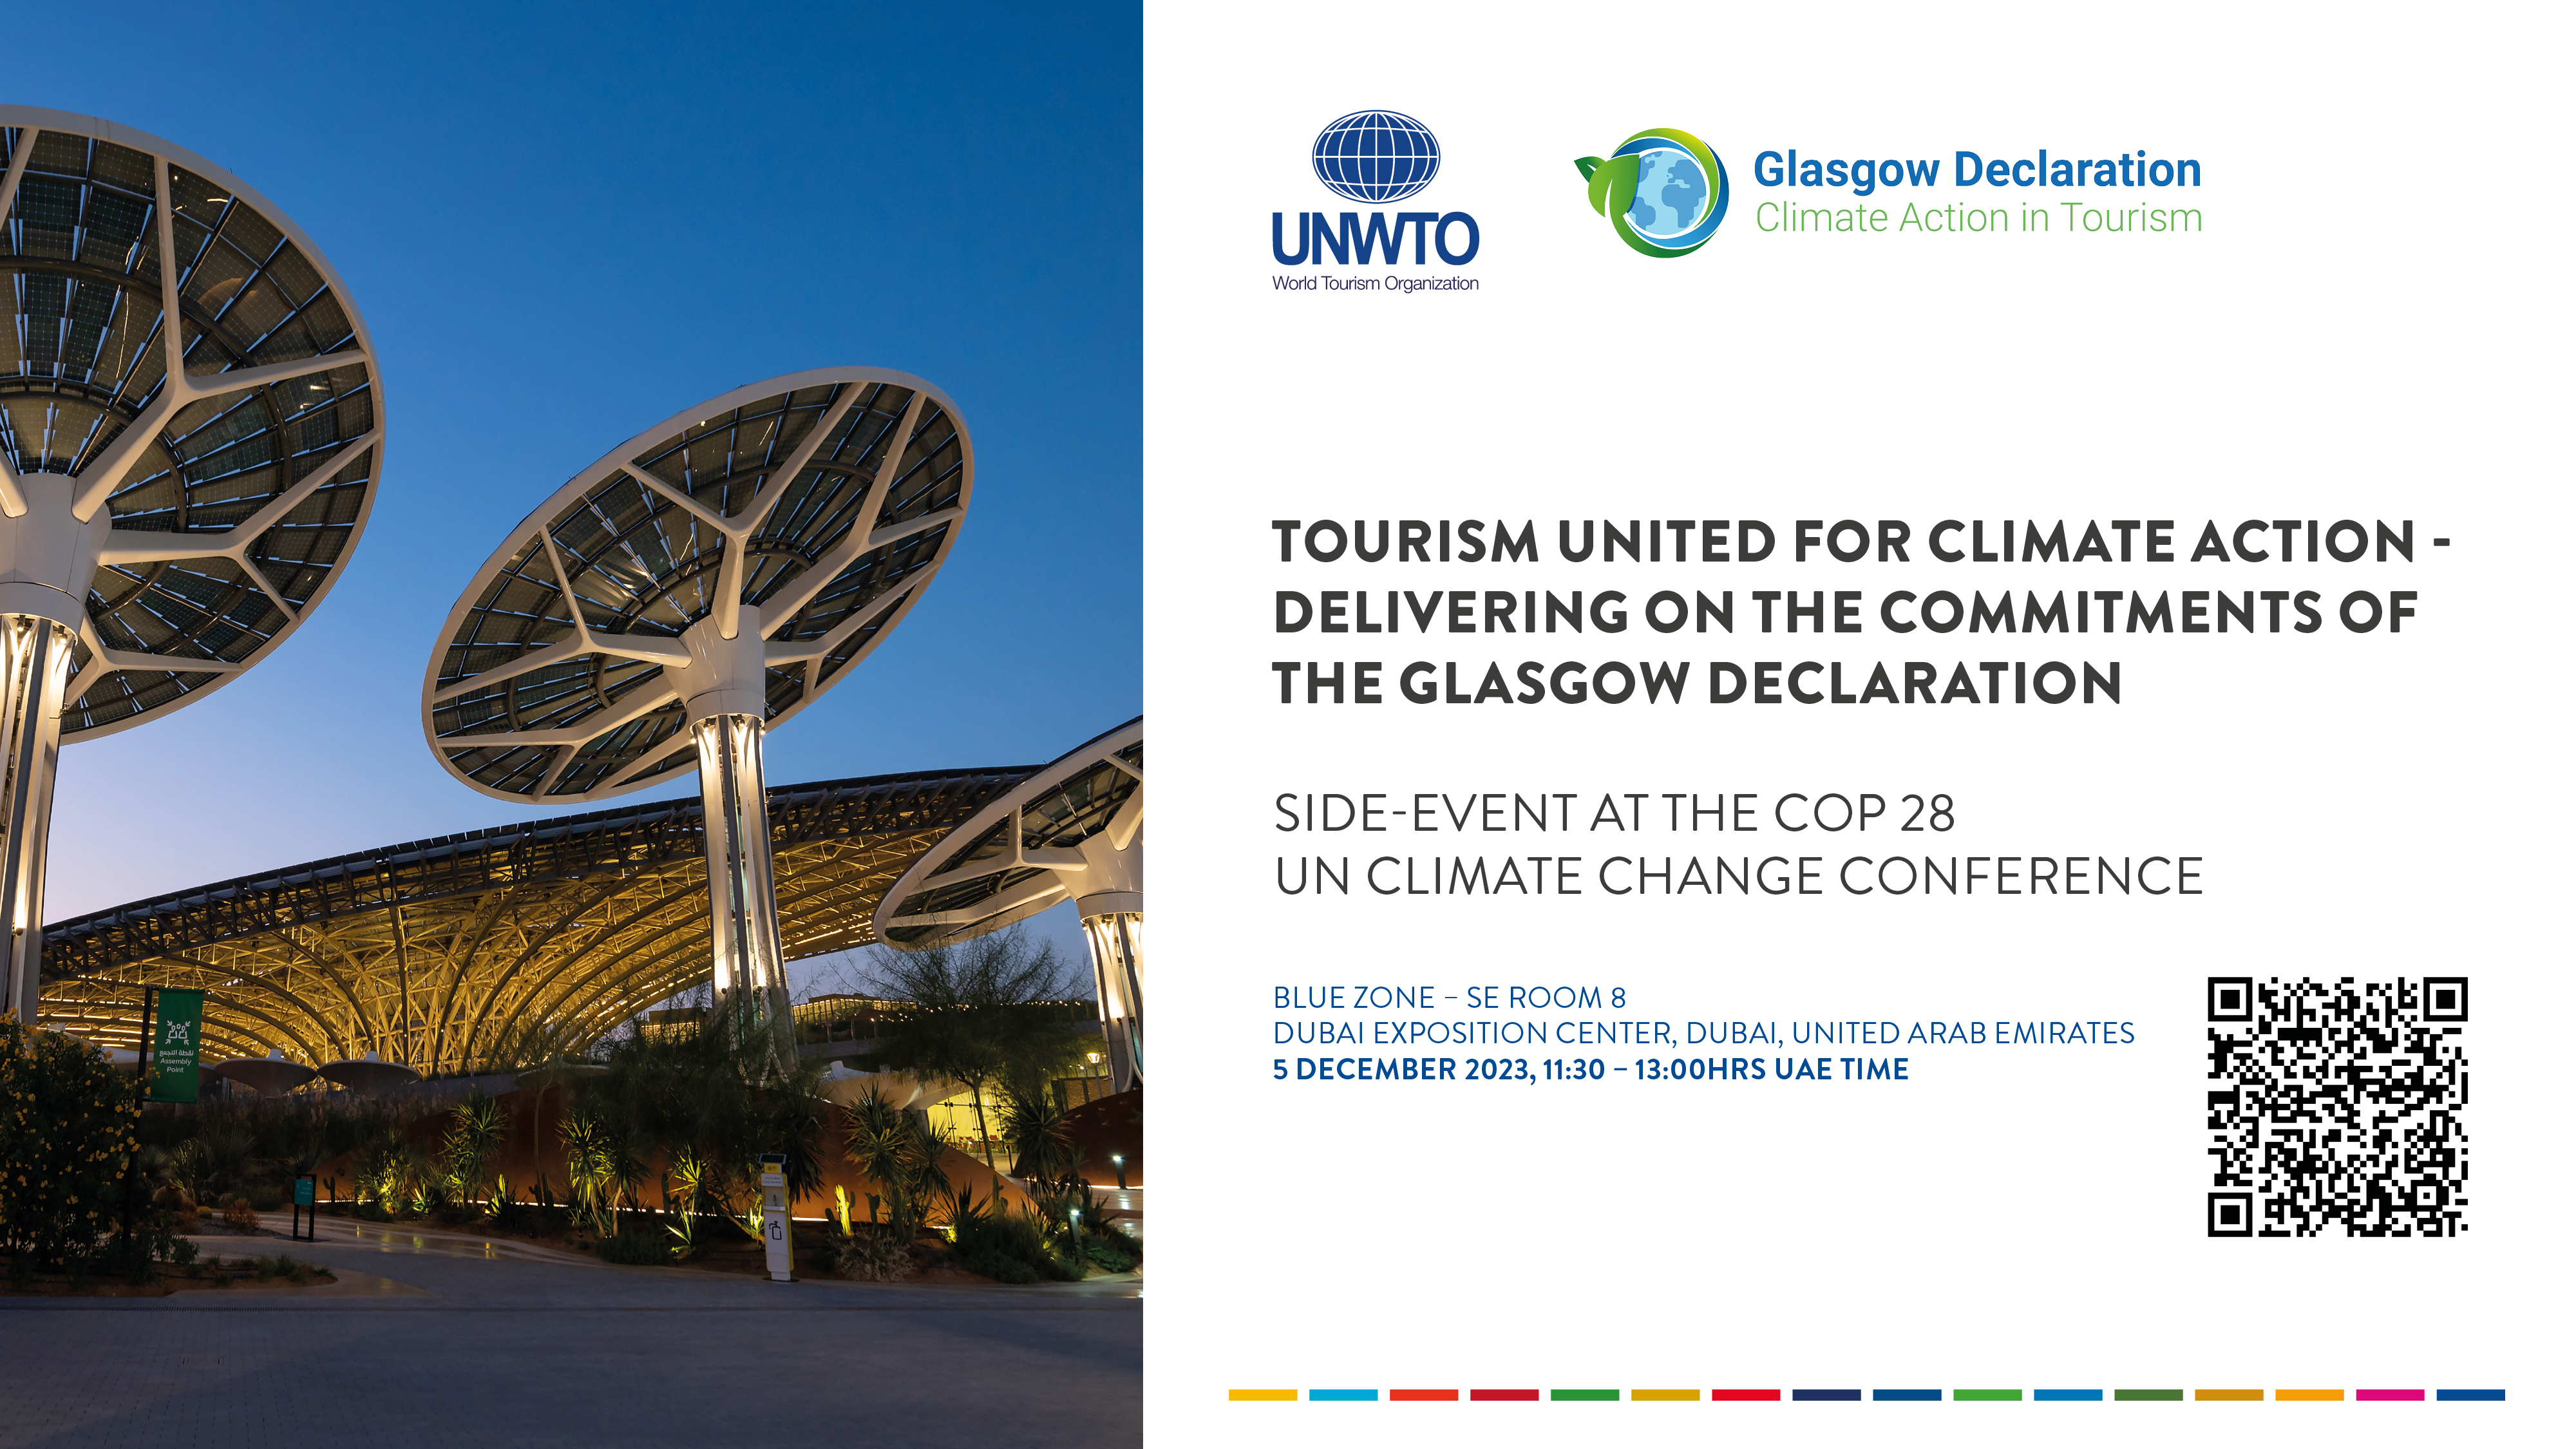 Policies and Corporate Strategies scaling up climate action in tourism the galsgow Declaration - BlueZone, 10-11-2022 11:30 - 13:00